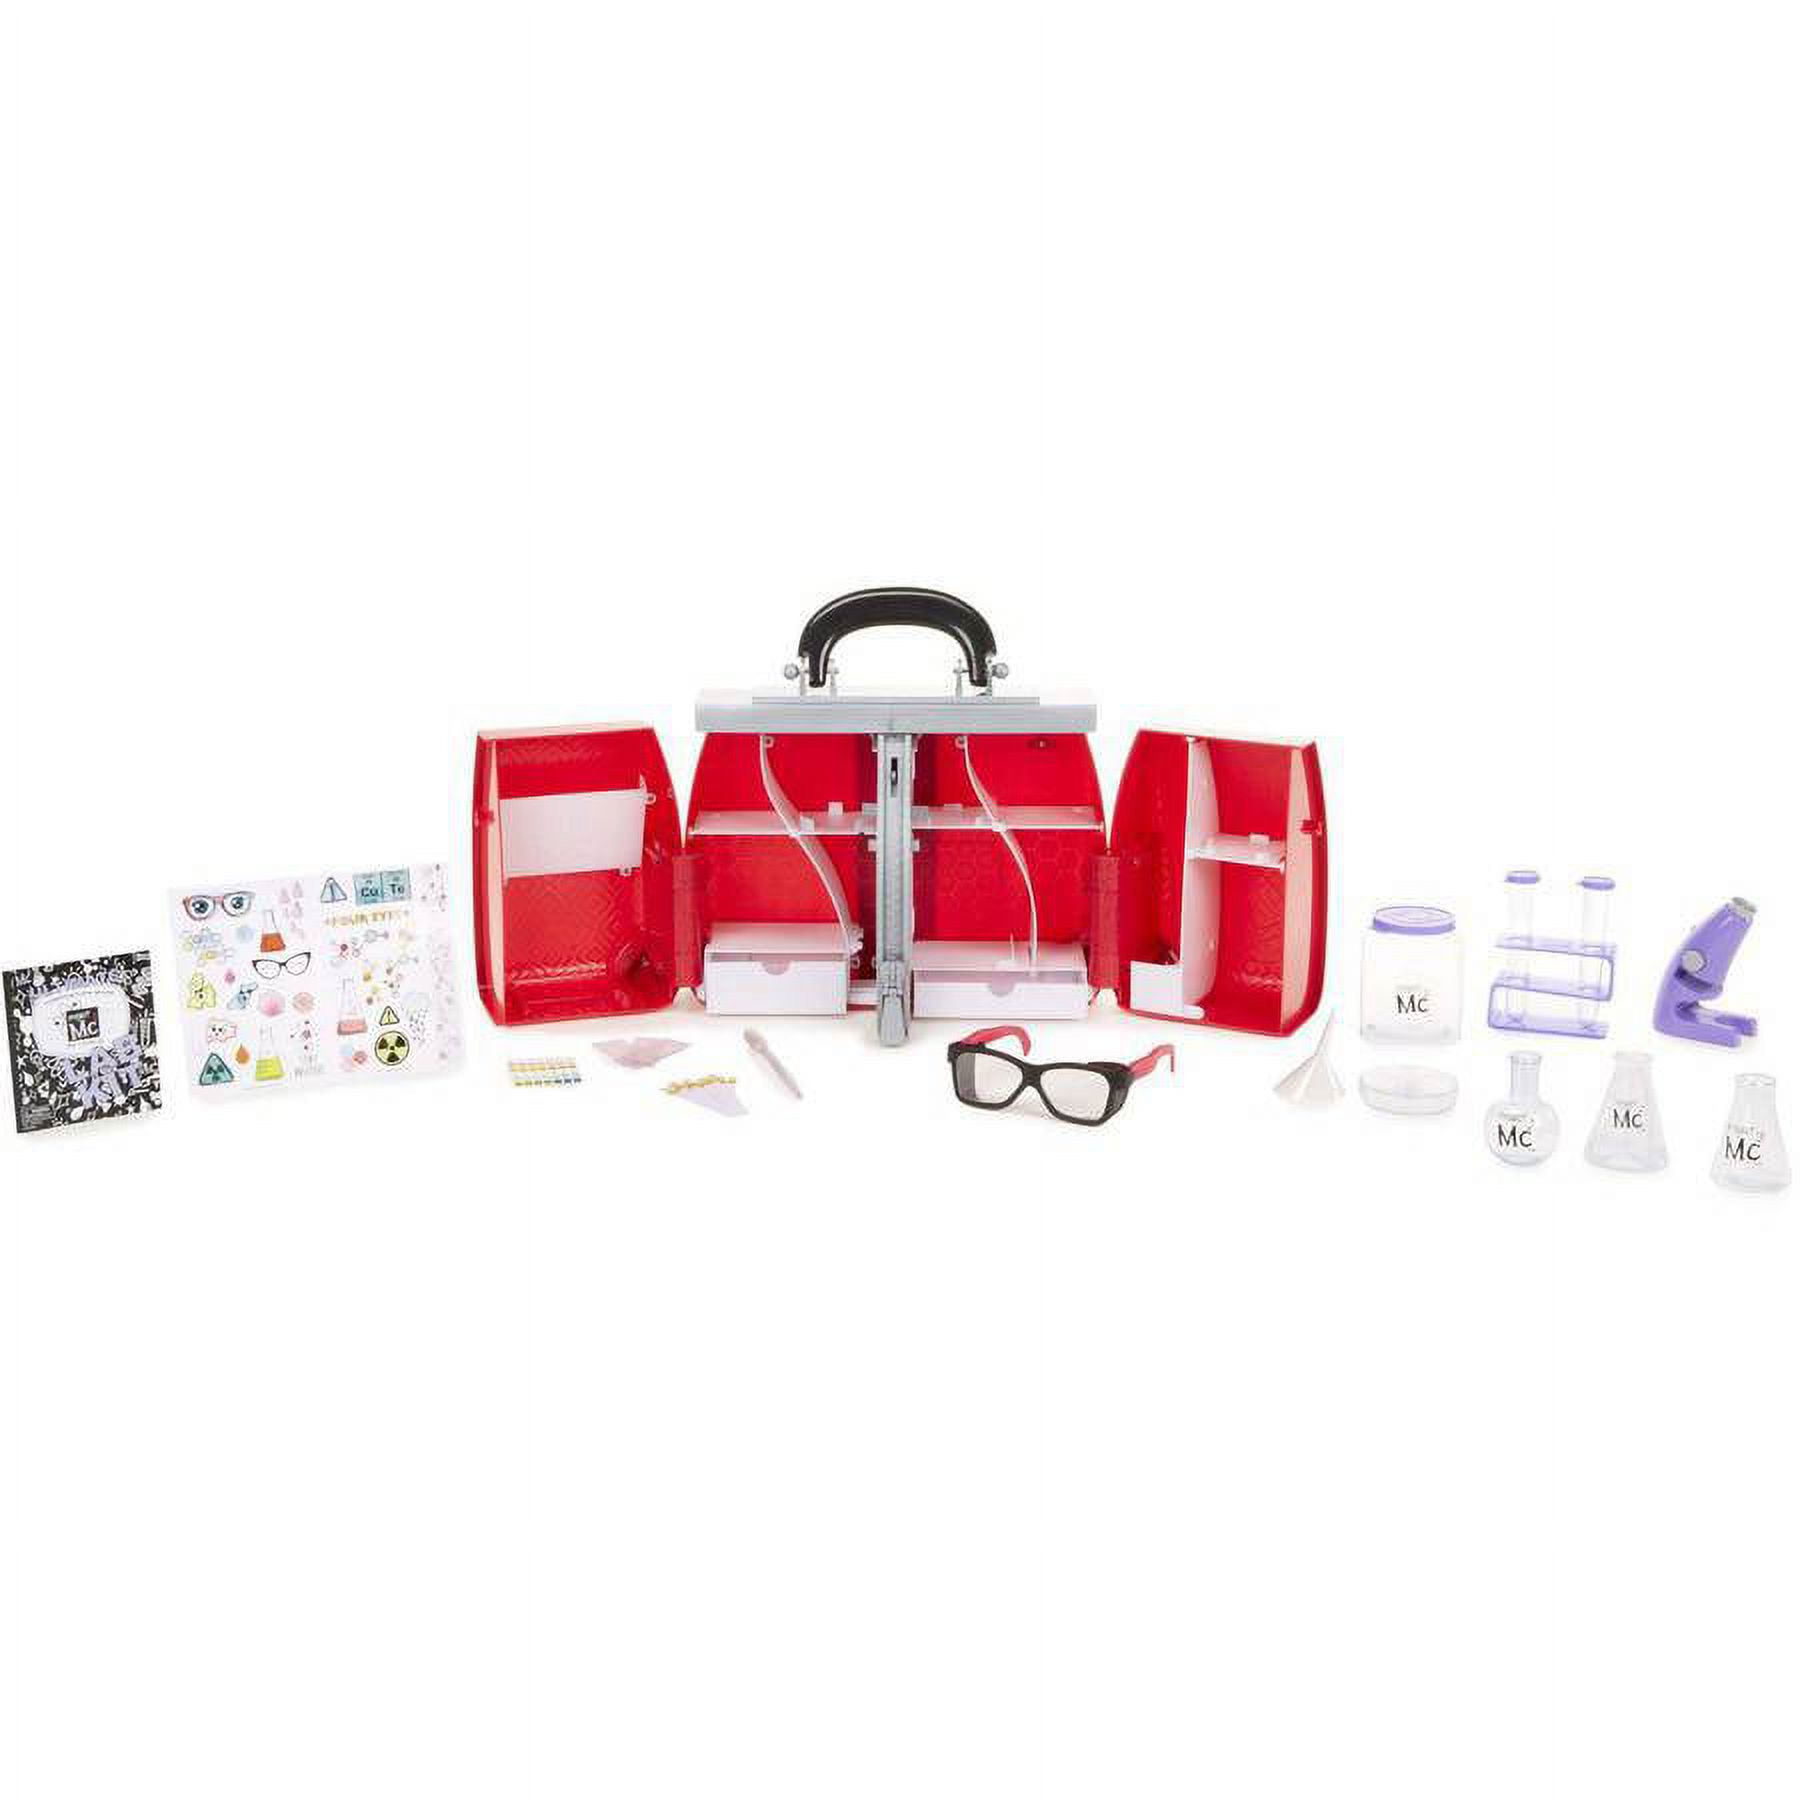 Project Mc2 Ultimate Lab Kit with 15+ Experiments - image 3 of 4